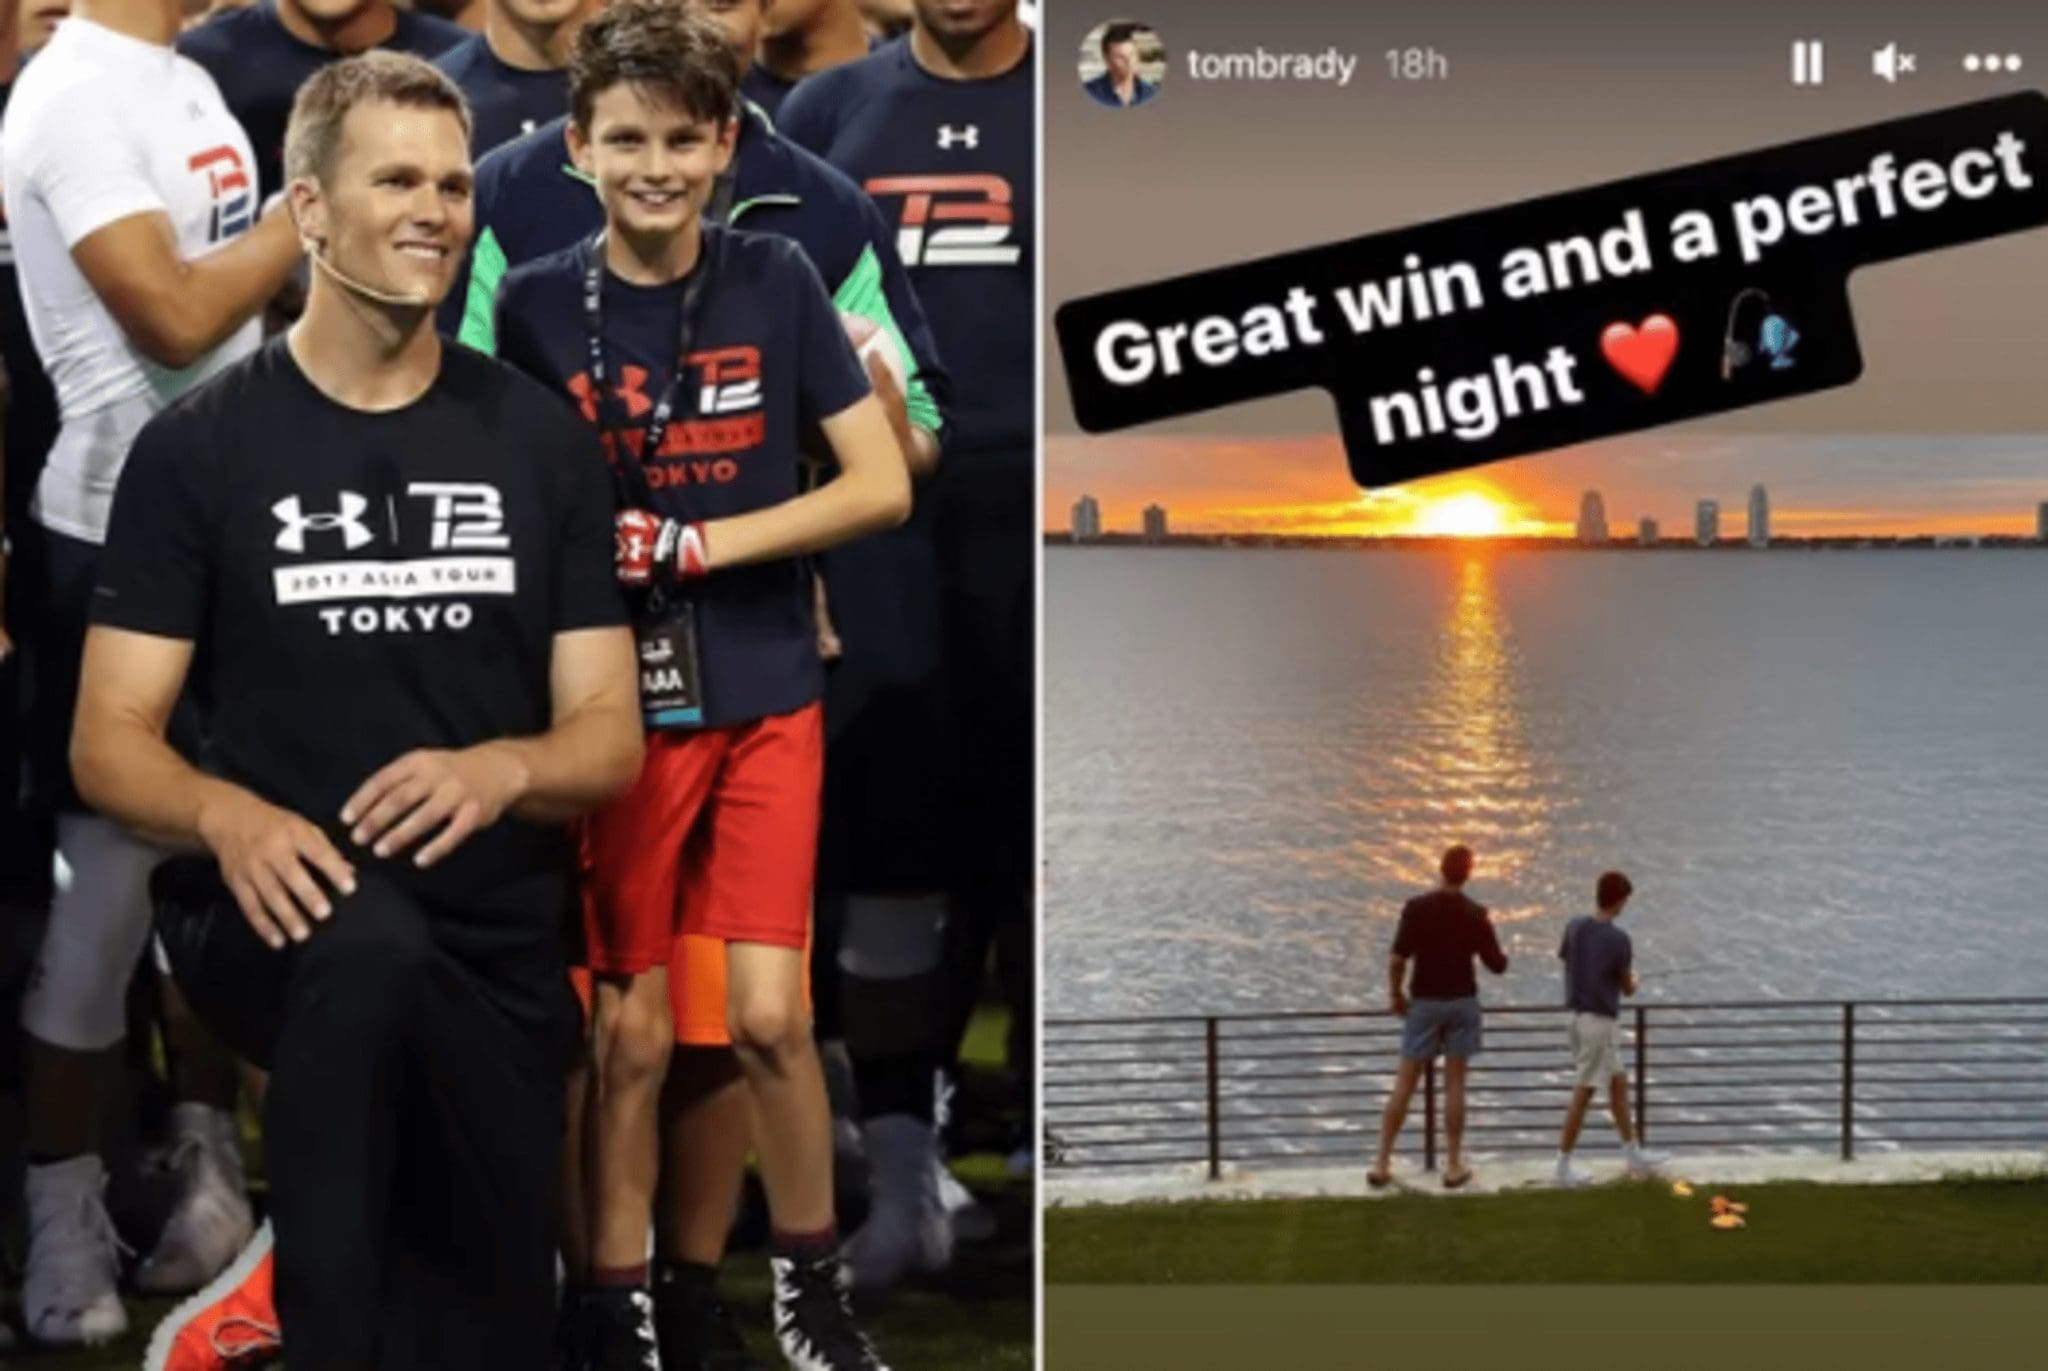 After Tom Brady's NFL playoff game, he and his son Jack admired the sunset.